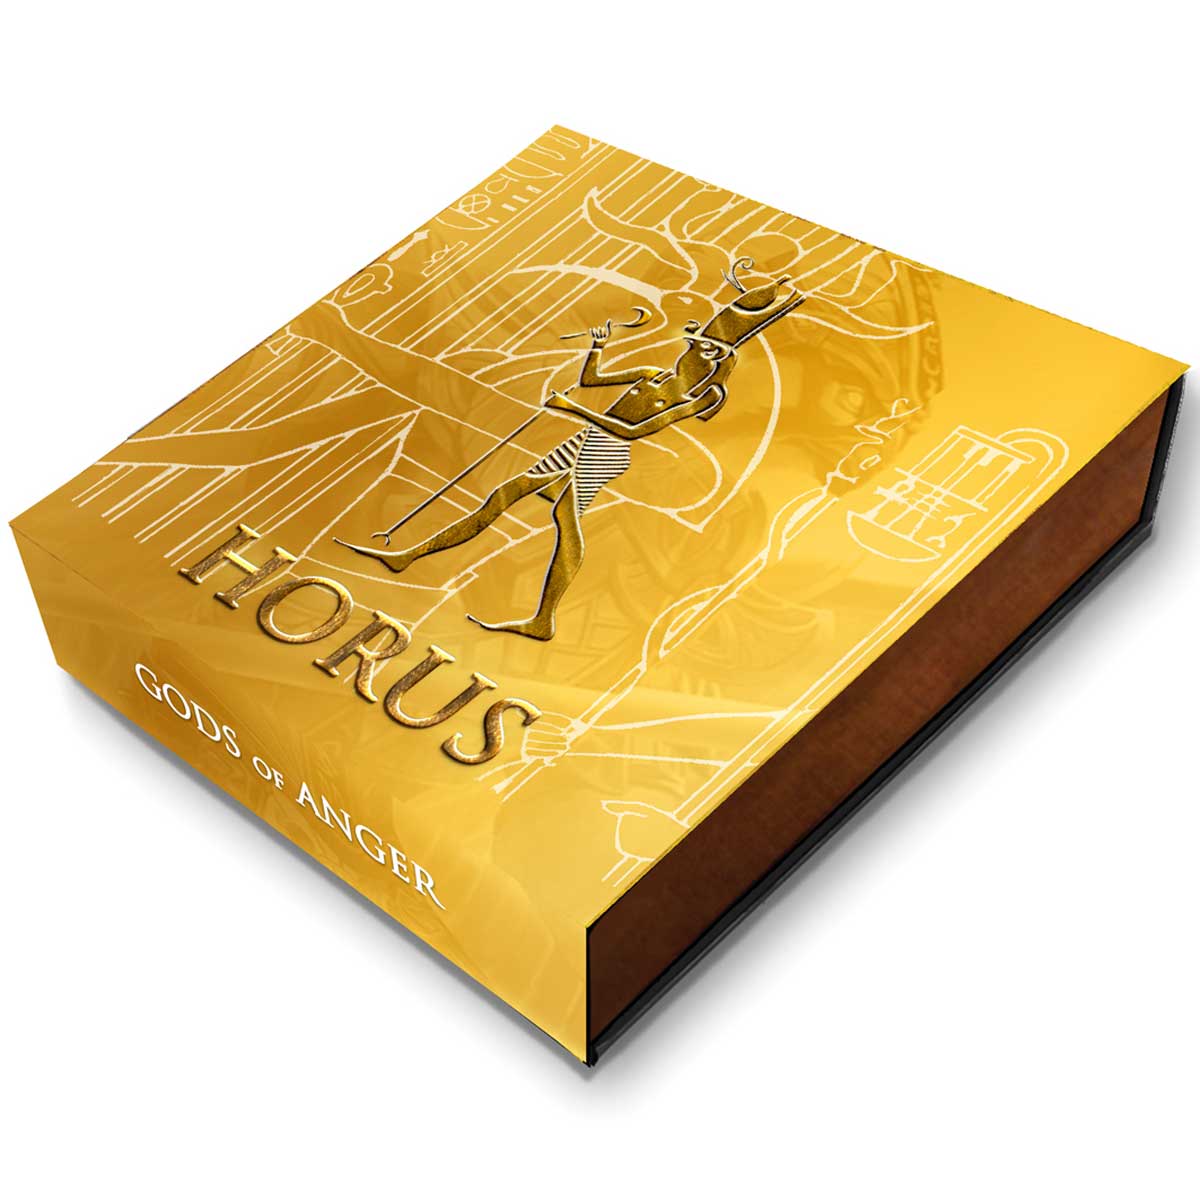 2020 - Horus Gods of Anger 2 oz Silver Coin With Gold Plating - Niue